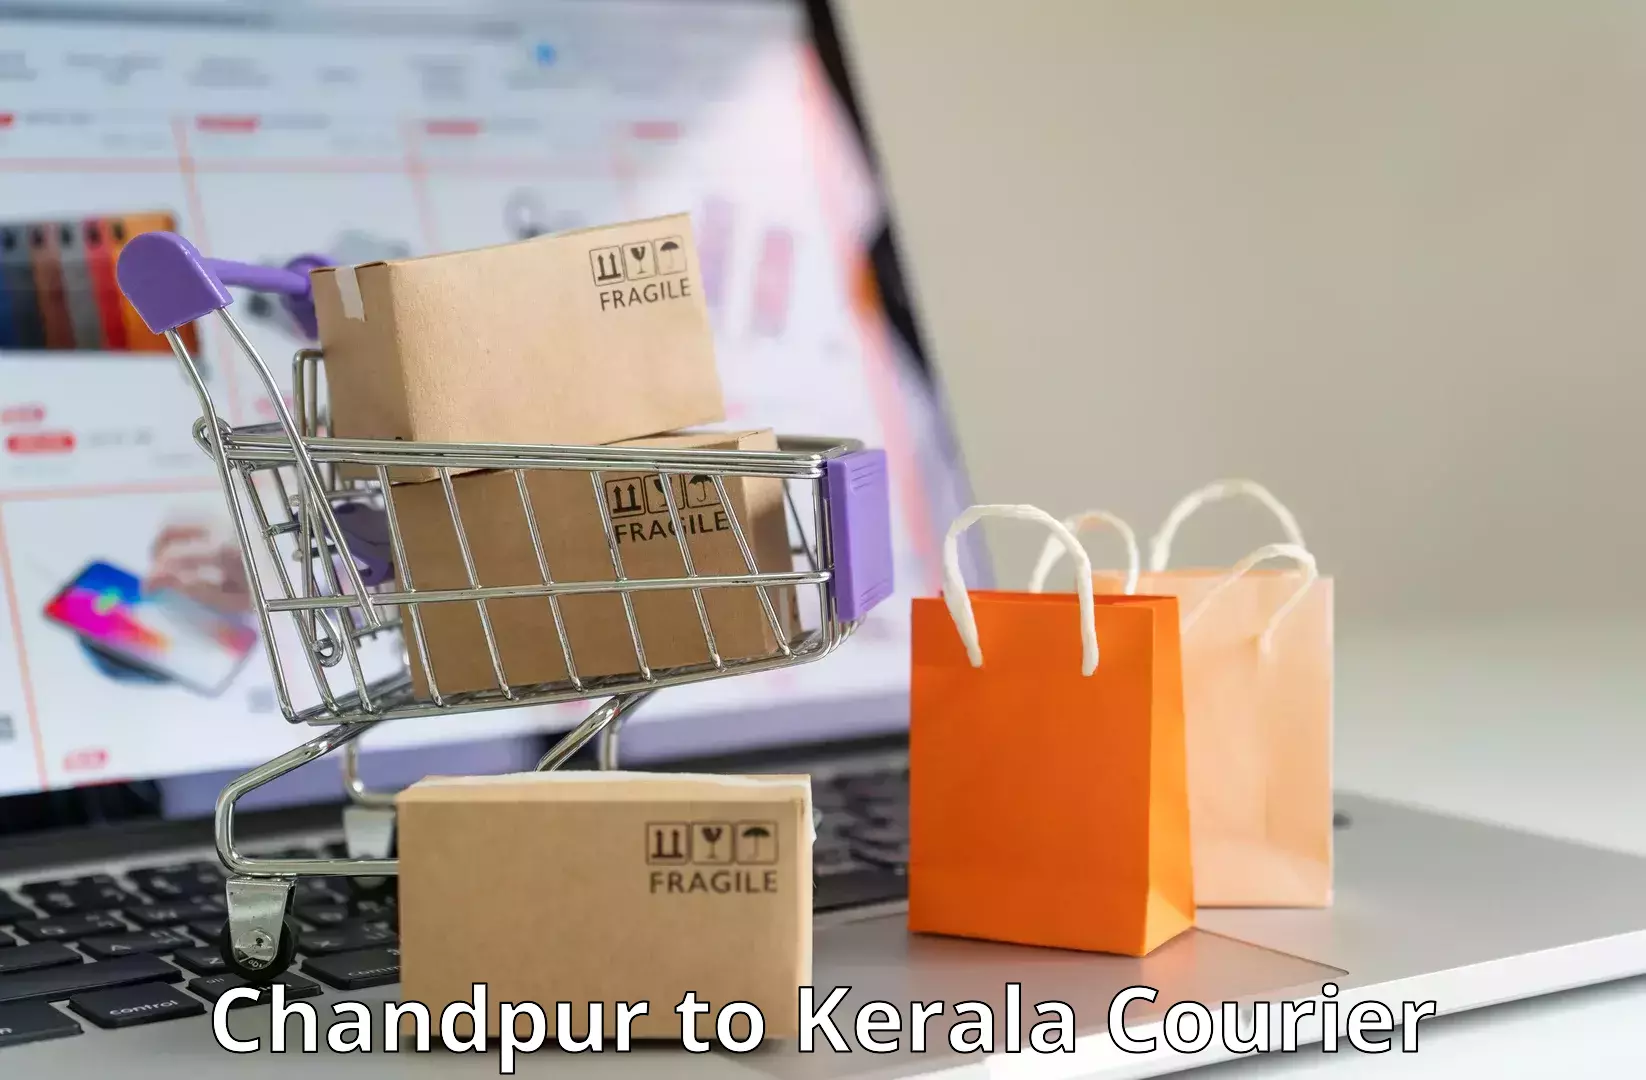 Business delivery service Chandpur to Kerala